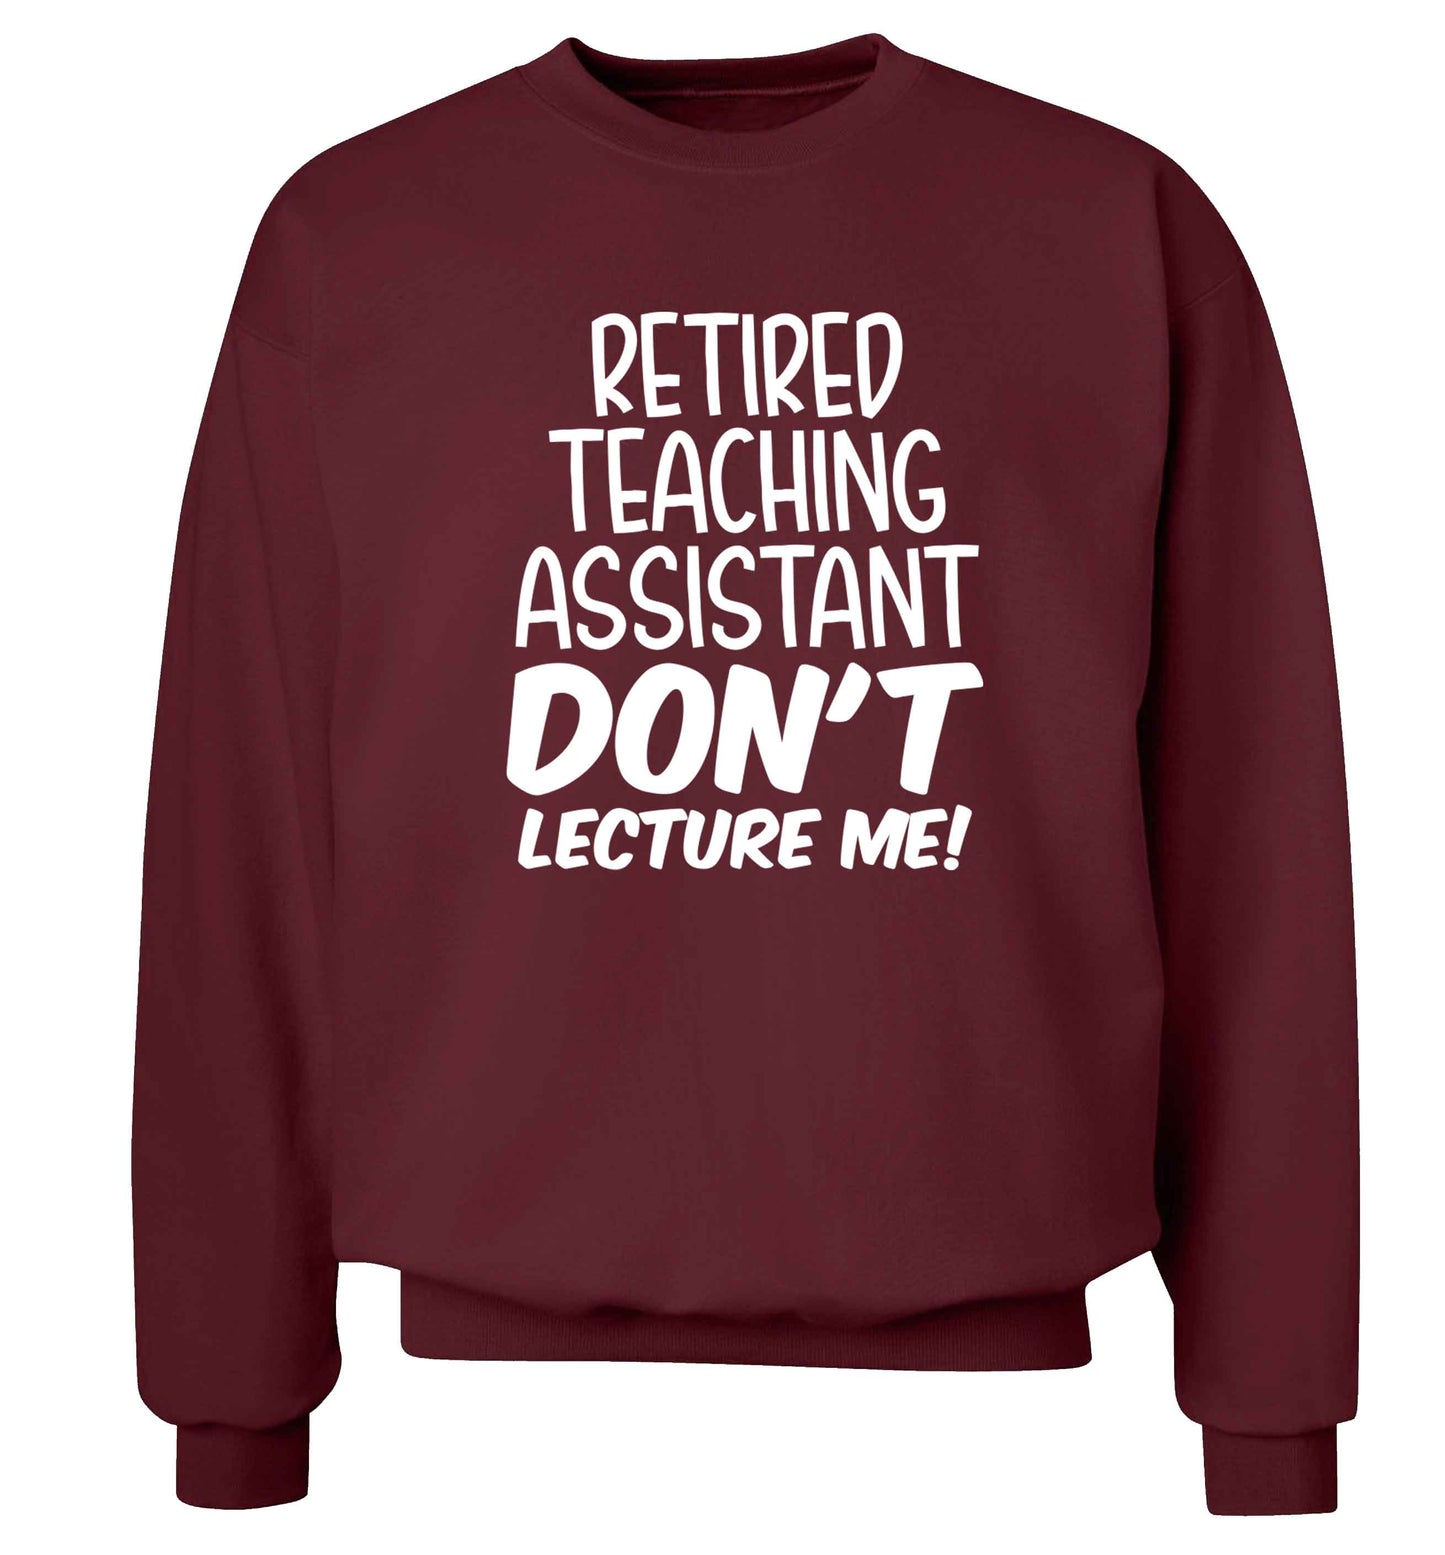 Retired teaching assistant don't lecture me Adult's unisex maroon Sweater 2XL